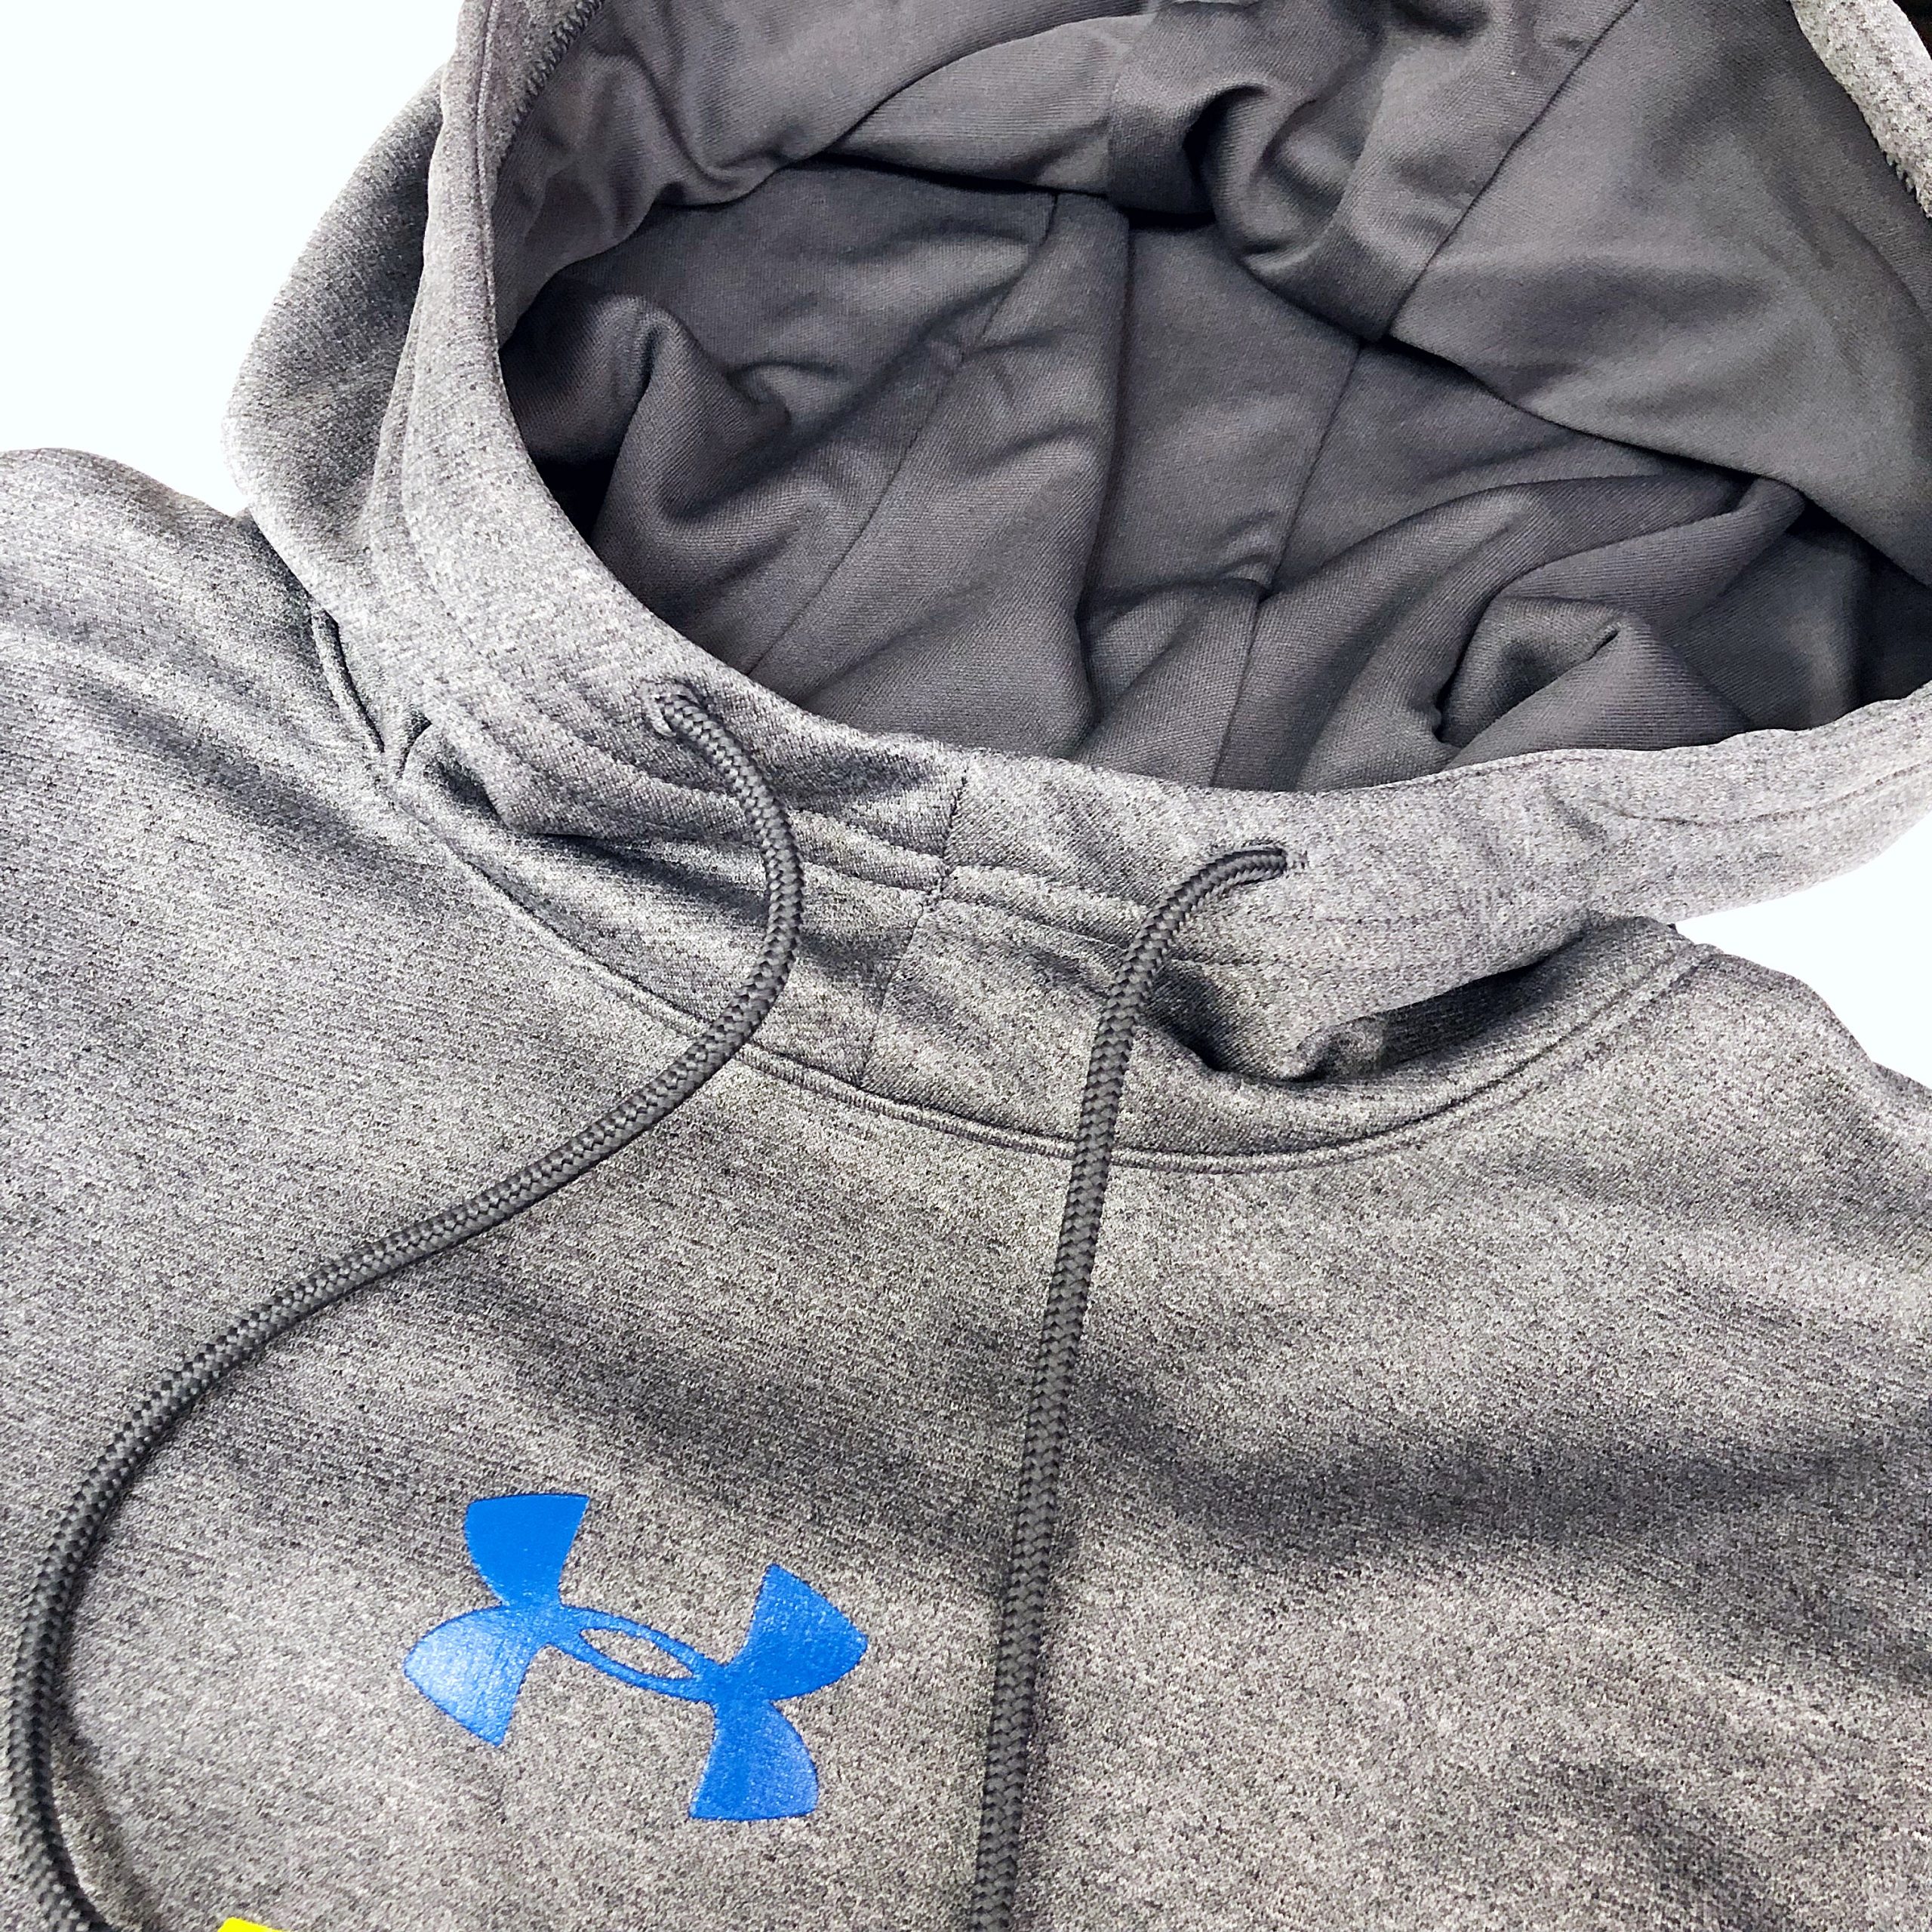 https://www.national5and10.com/wp-content/uploads/2018/09/University-of-Delaware-Under-Armour-Storm-Fleece-Hoodie-Detail-3-scaled.jpg